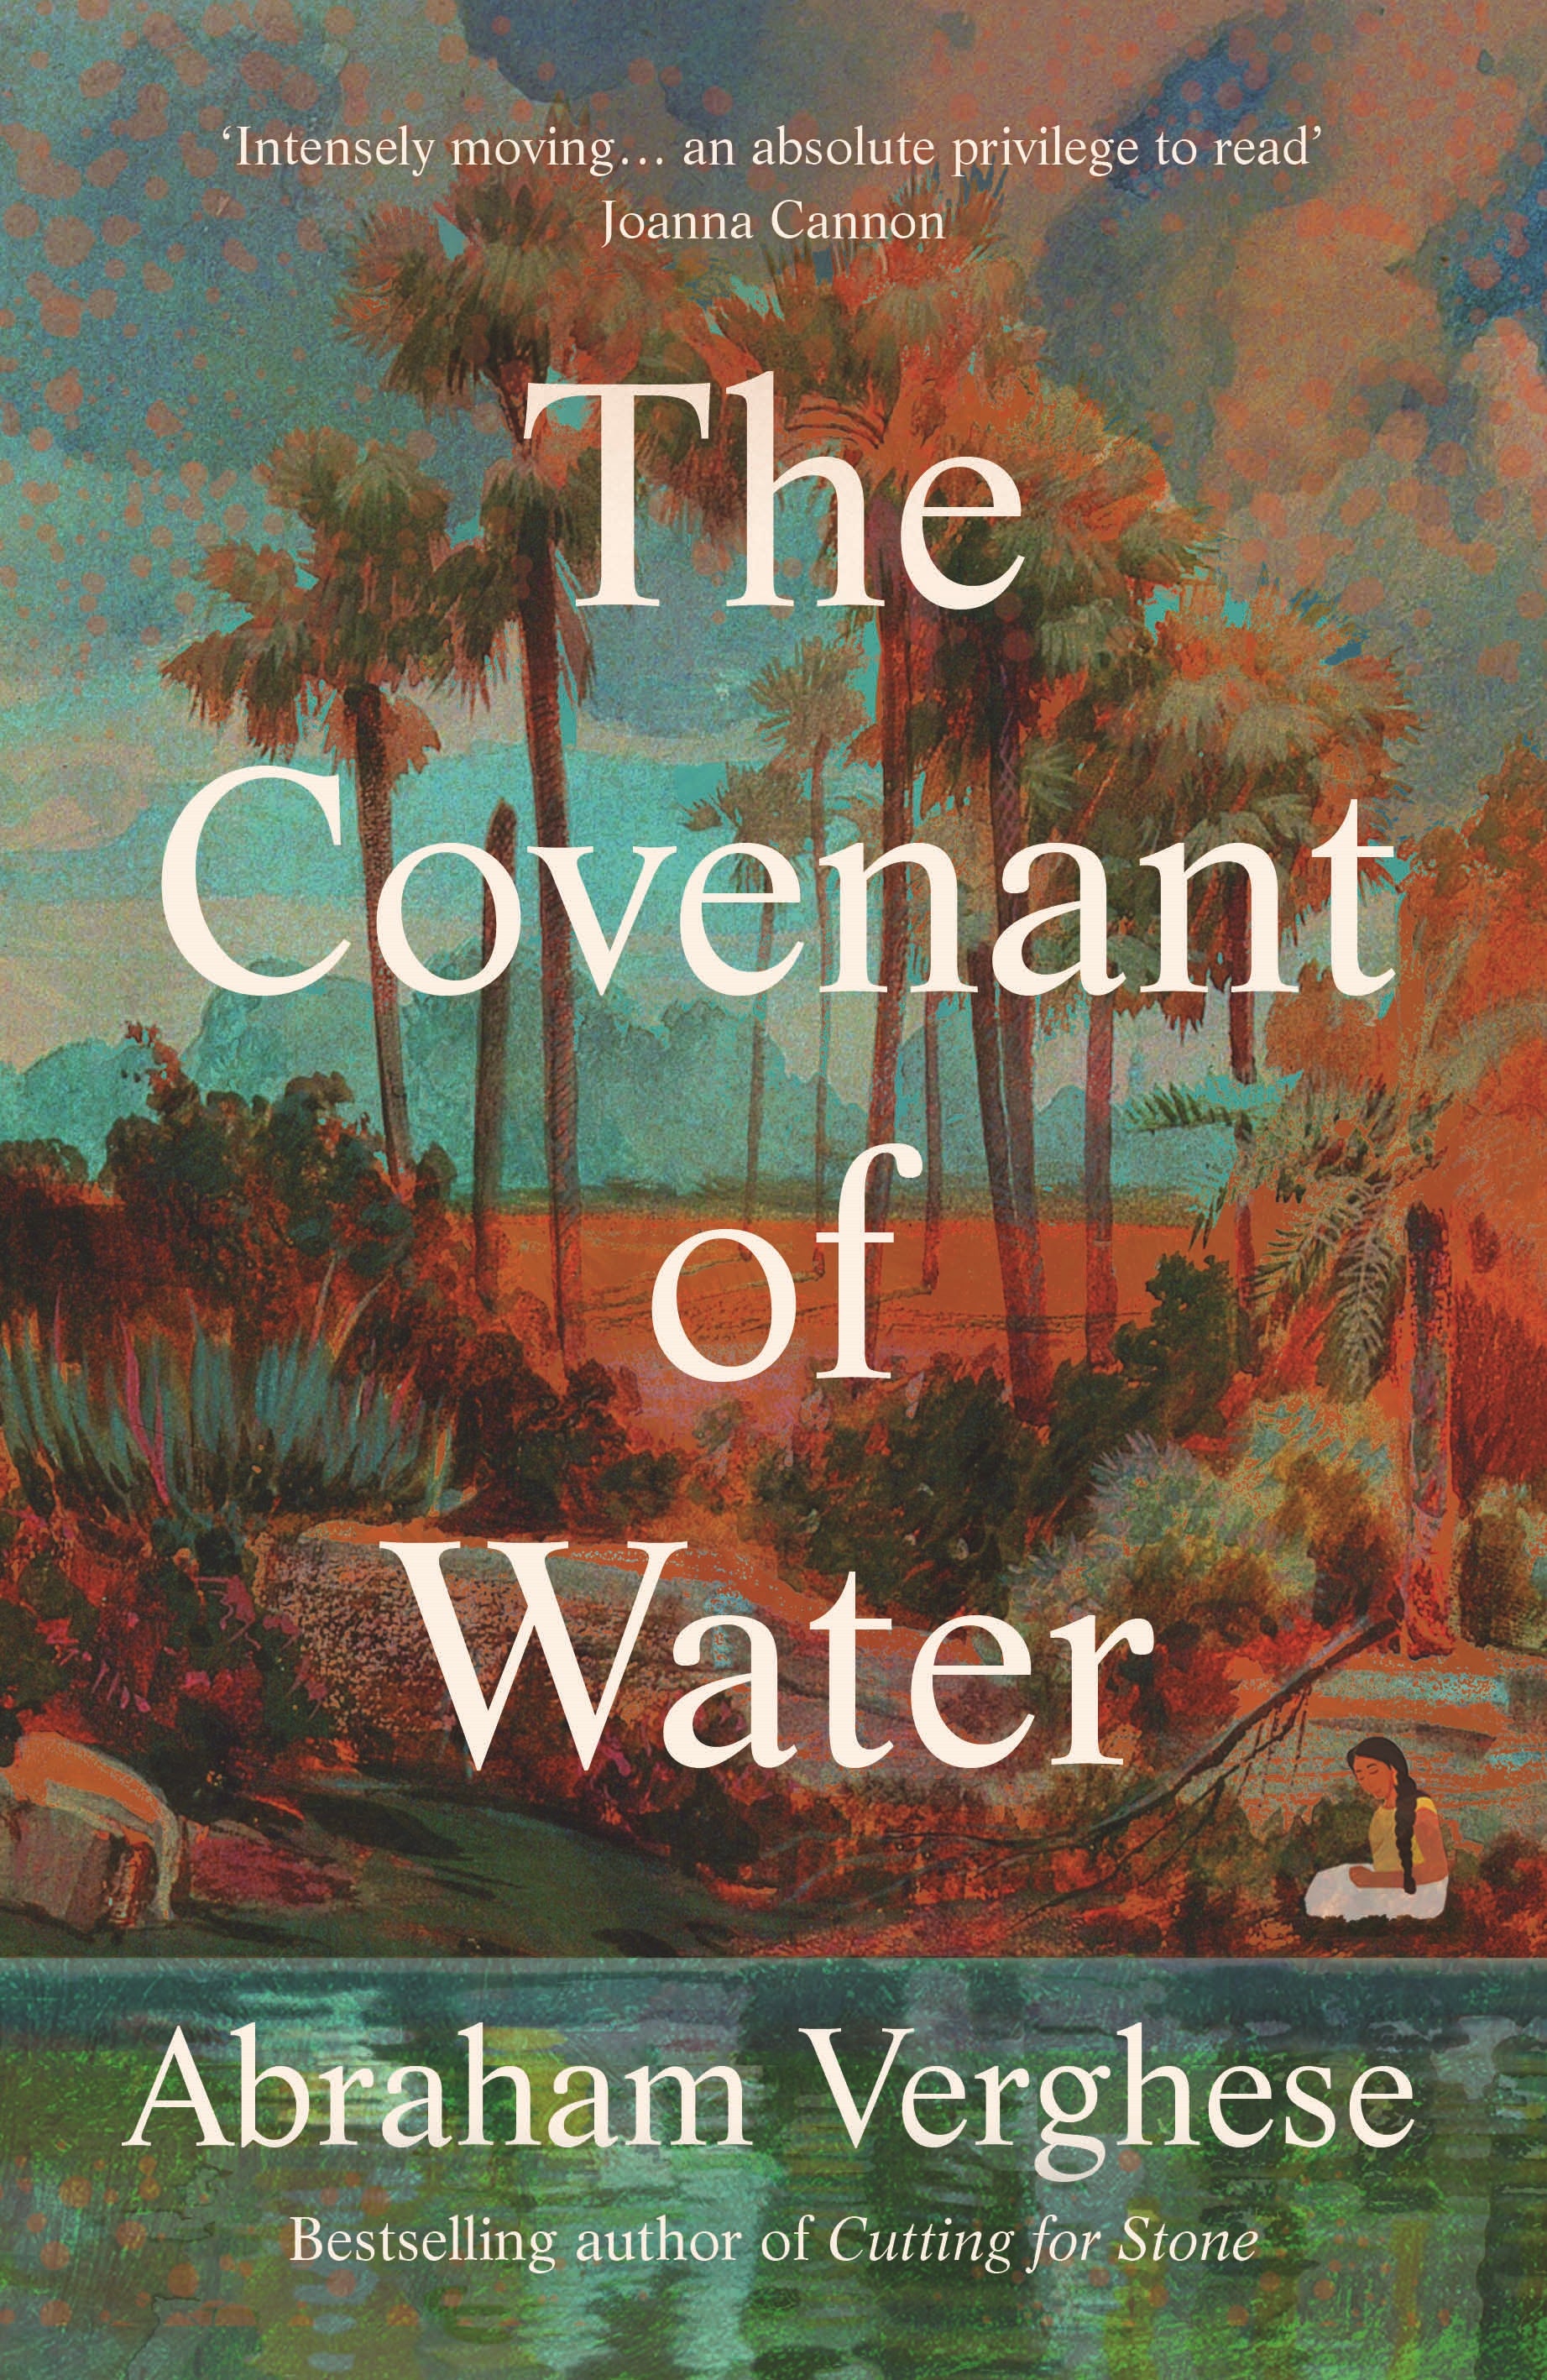 Cover of "The Covenant of Water" by Abraham Verghese